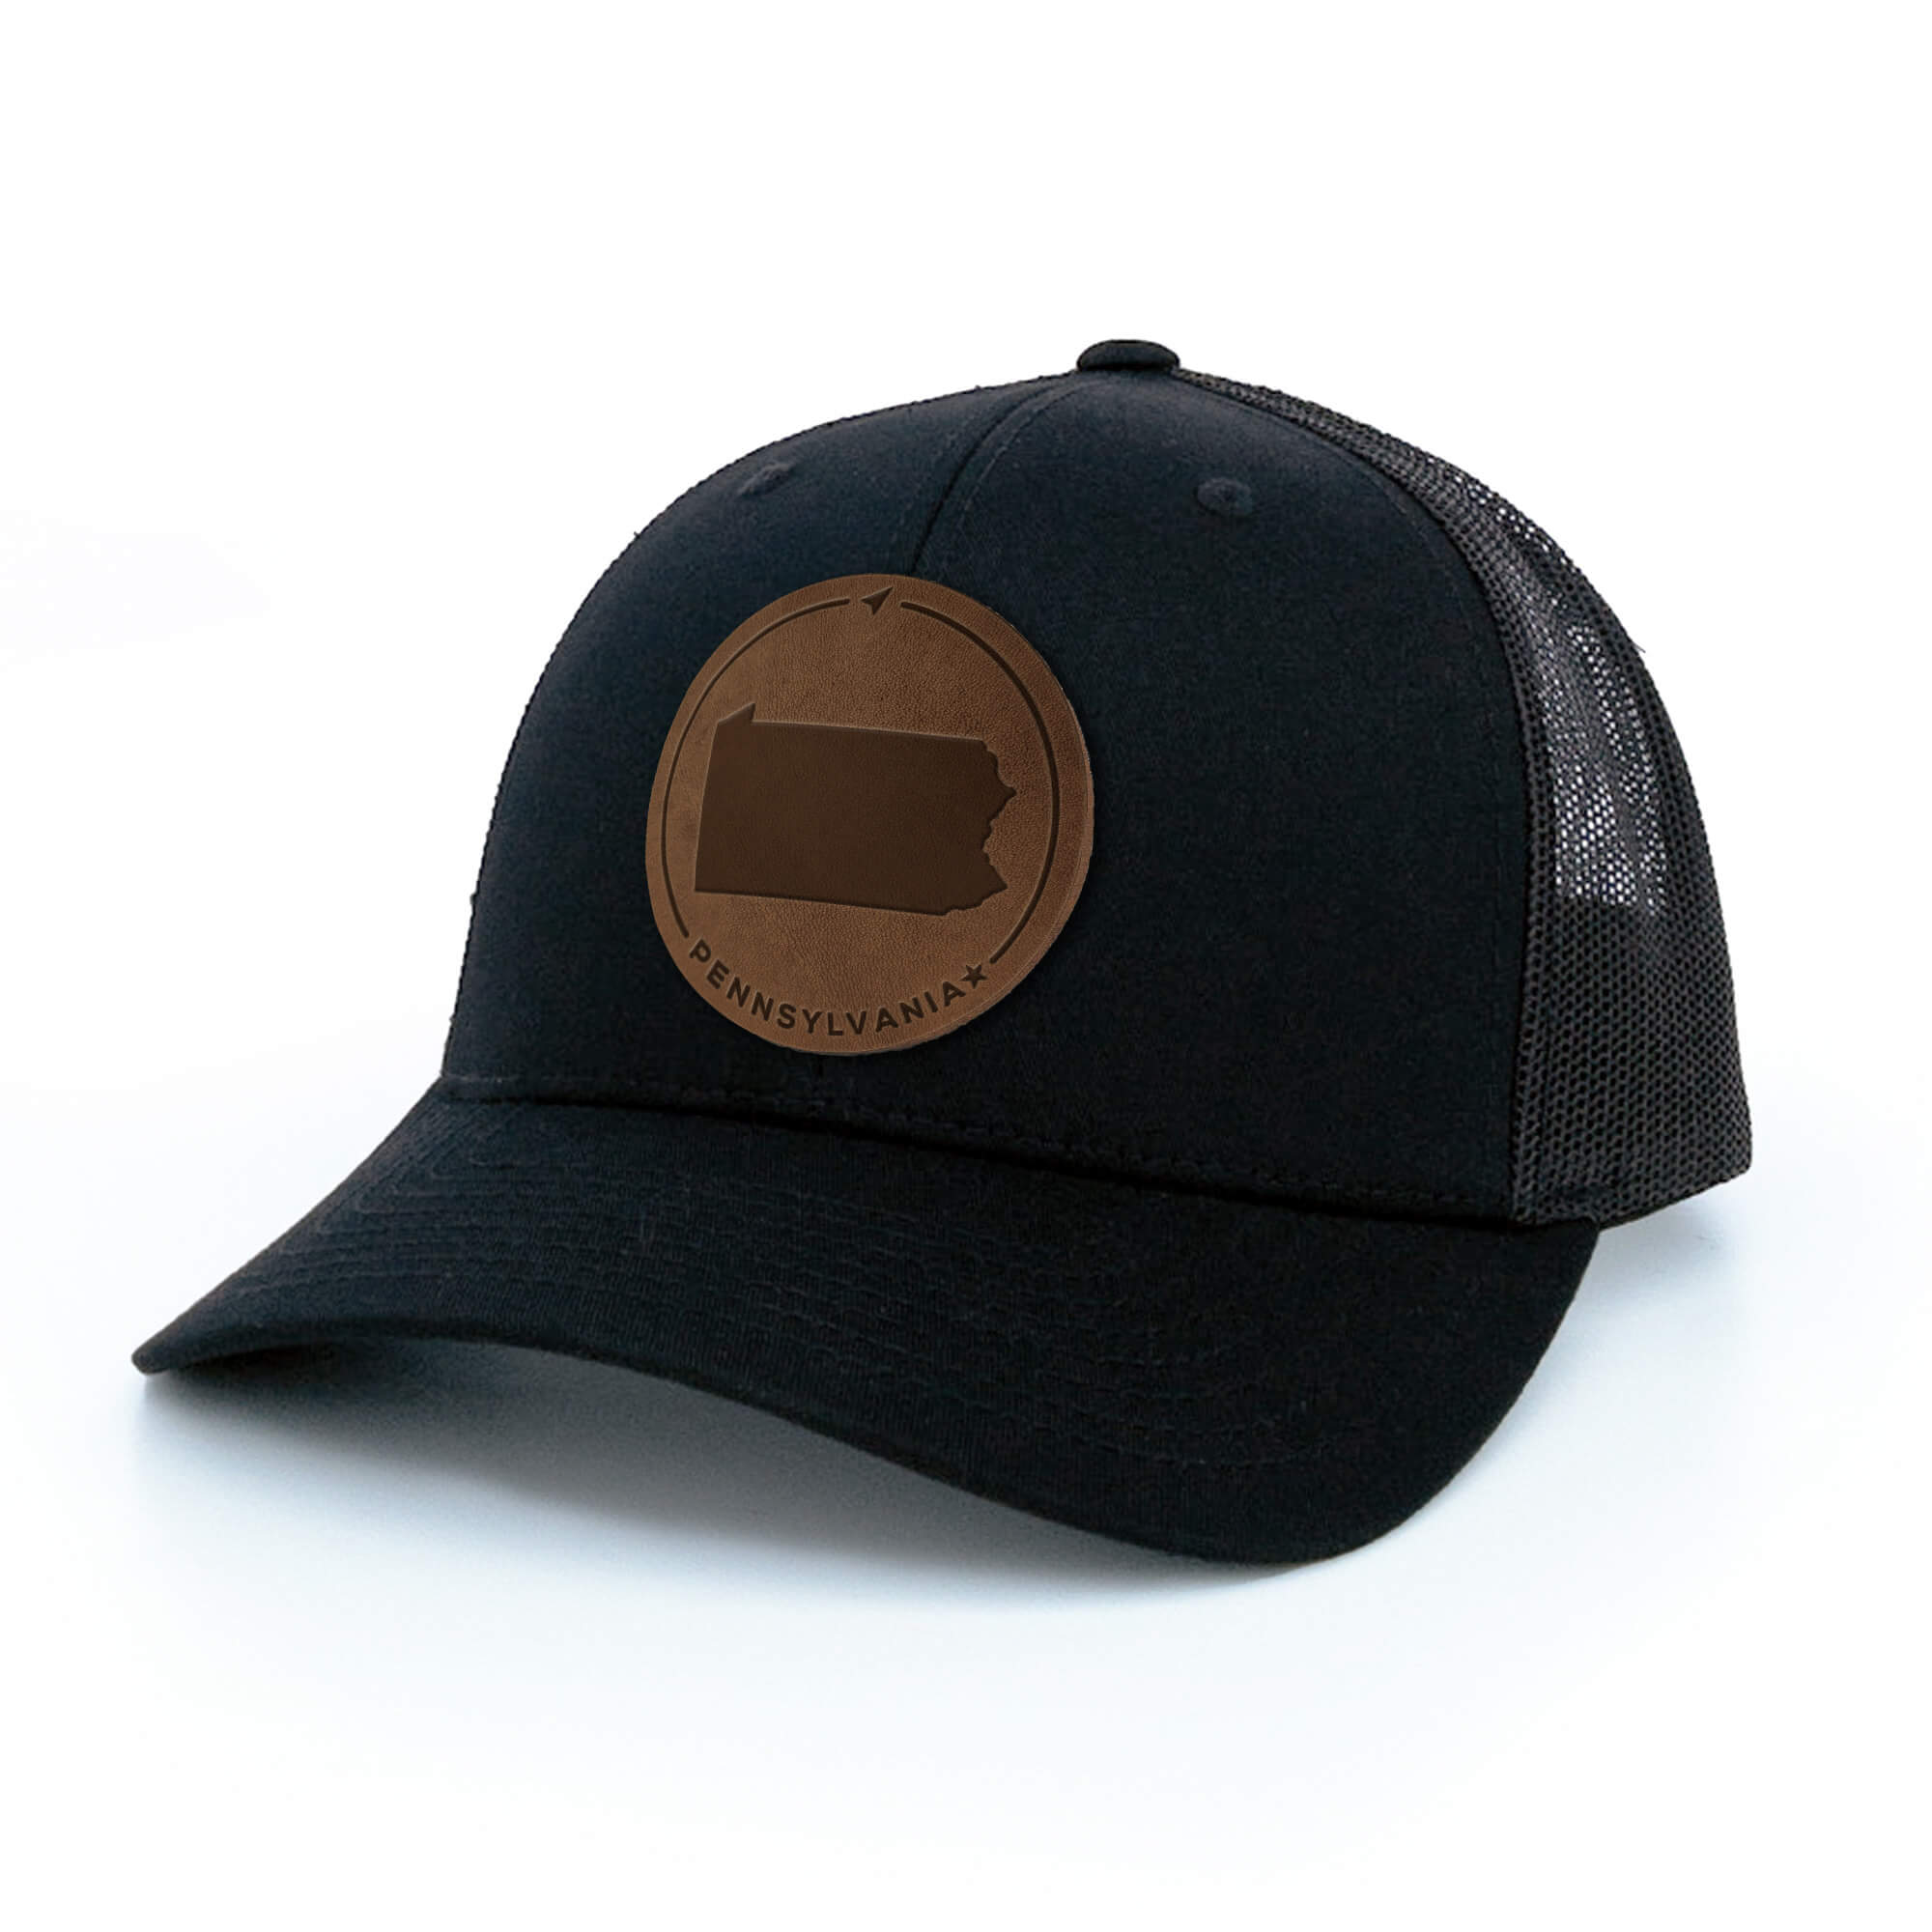 Black trucker hat with full-grain leather patch of Pennsylvania | BLACK-003-003, CHARC-003-003, NAVY-003-003, HGREY-003-003, MOSS-003-003, BROWN-003-003